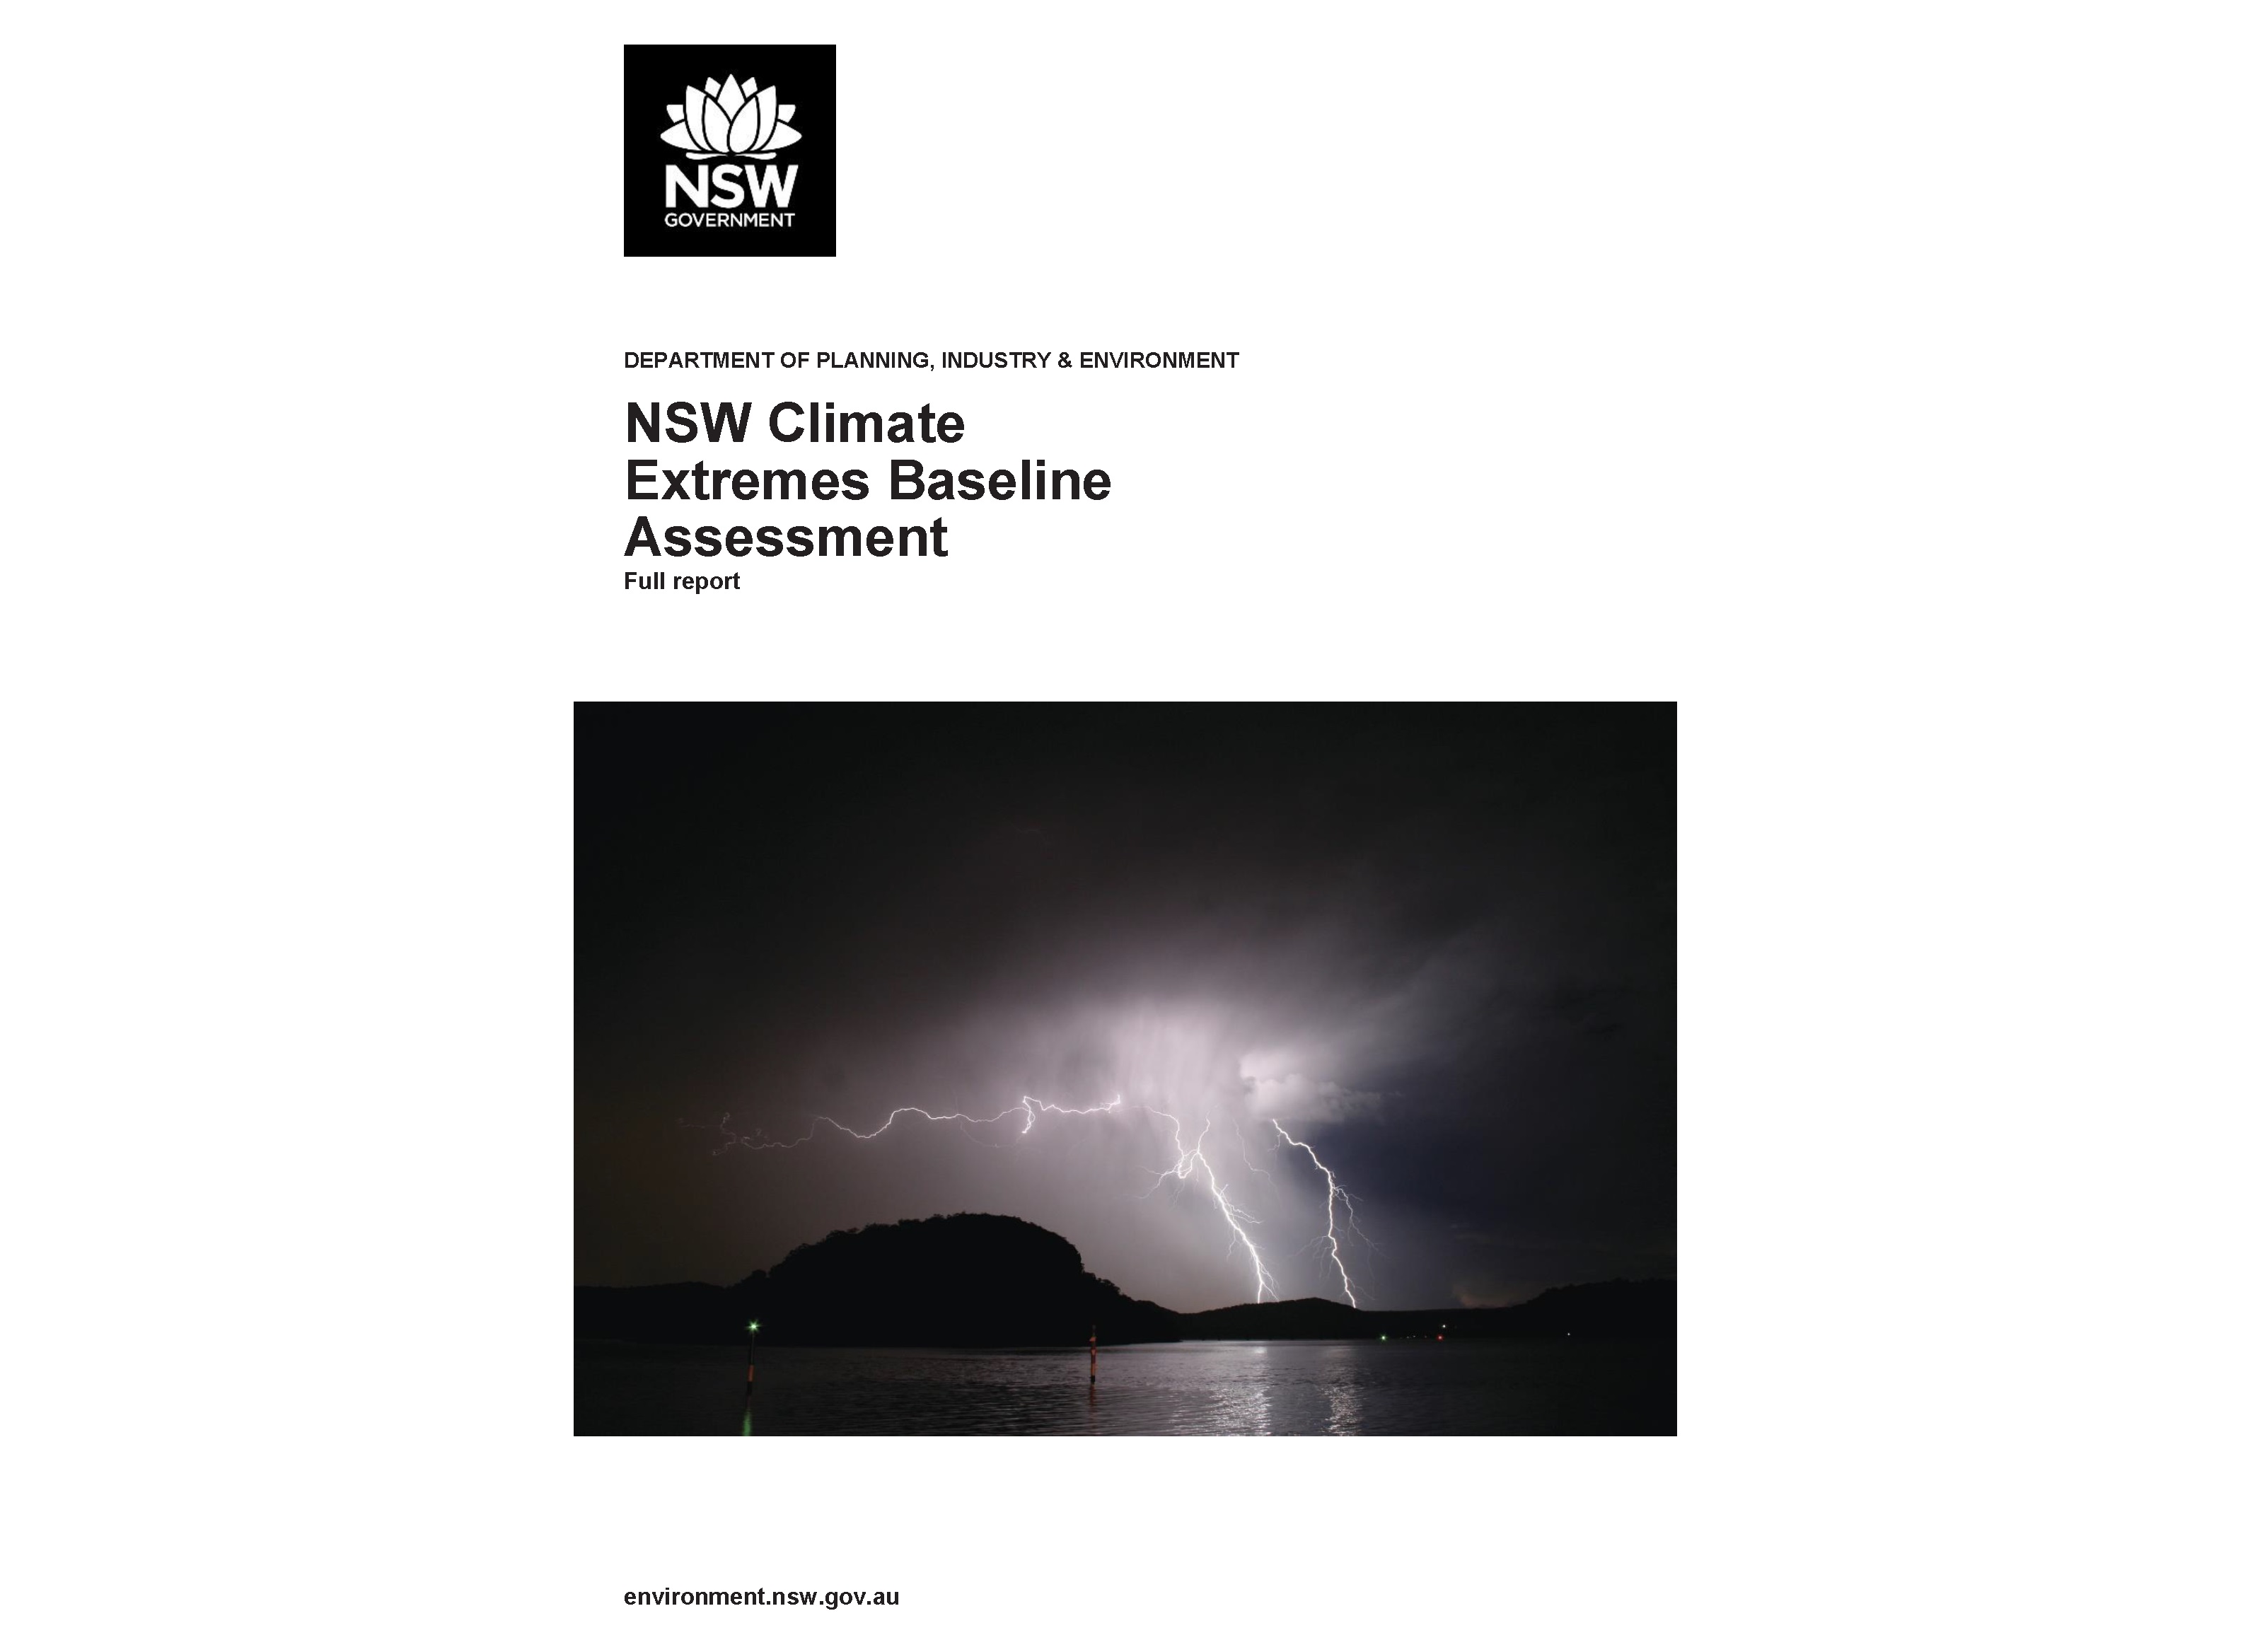 Cover of the NSW Climate Extremes Baseline Assessment Full report